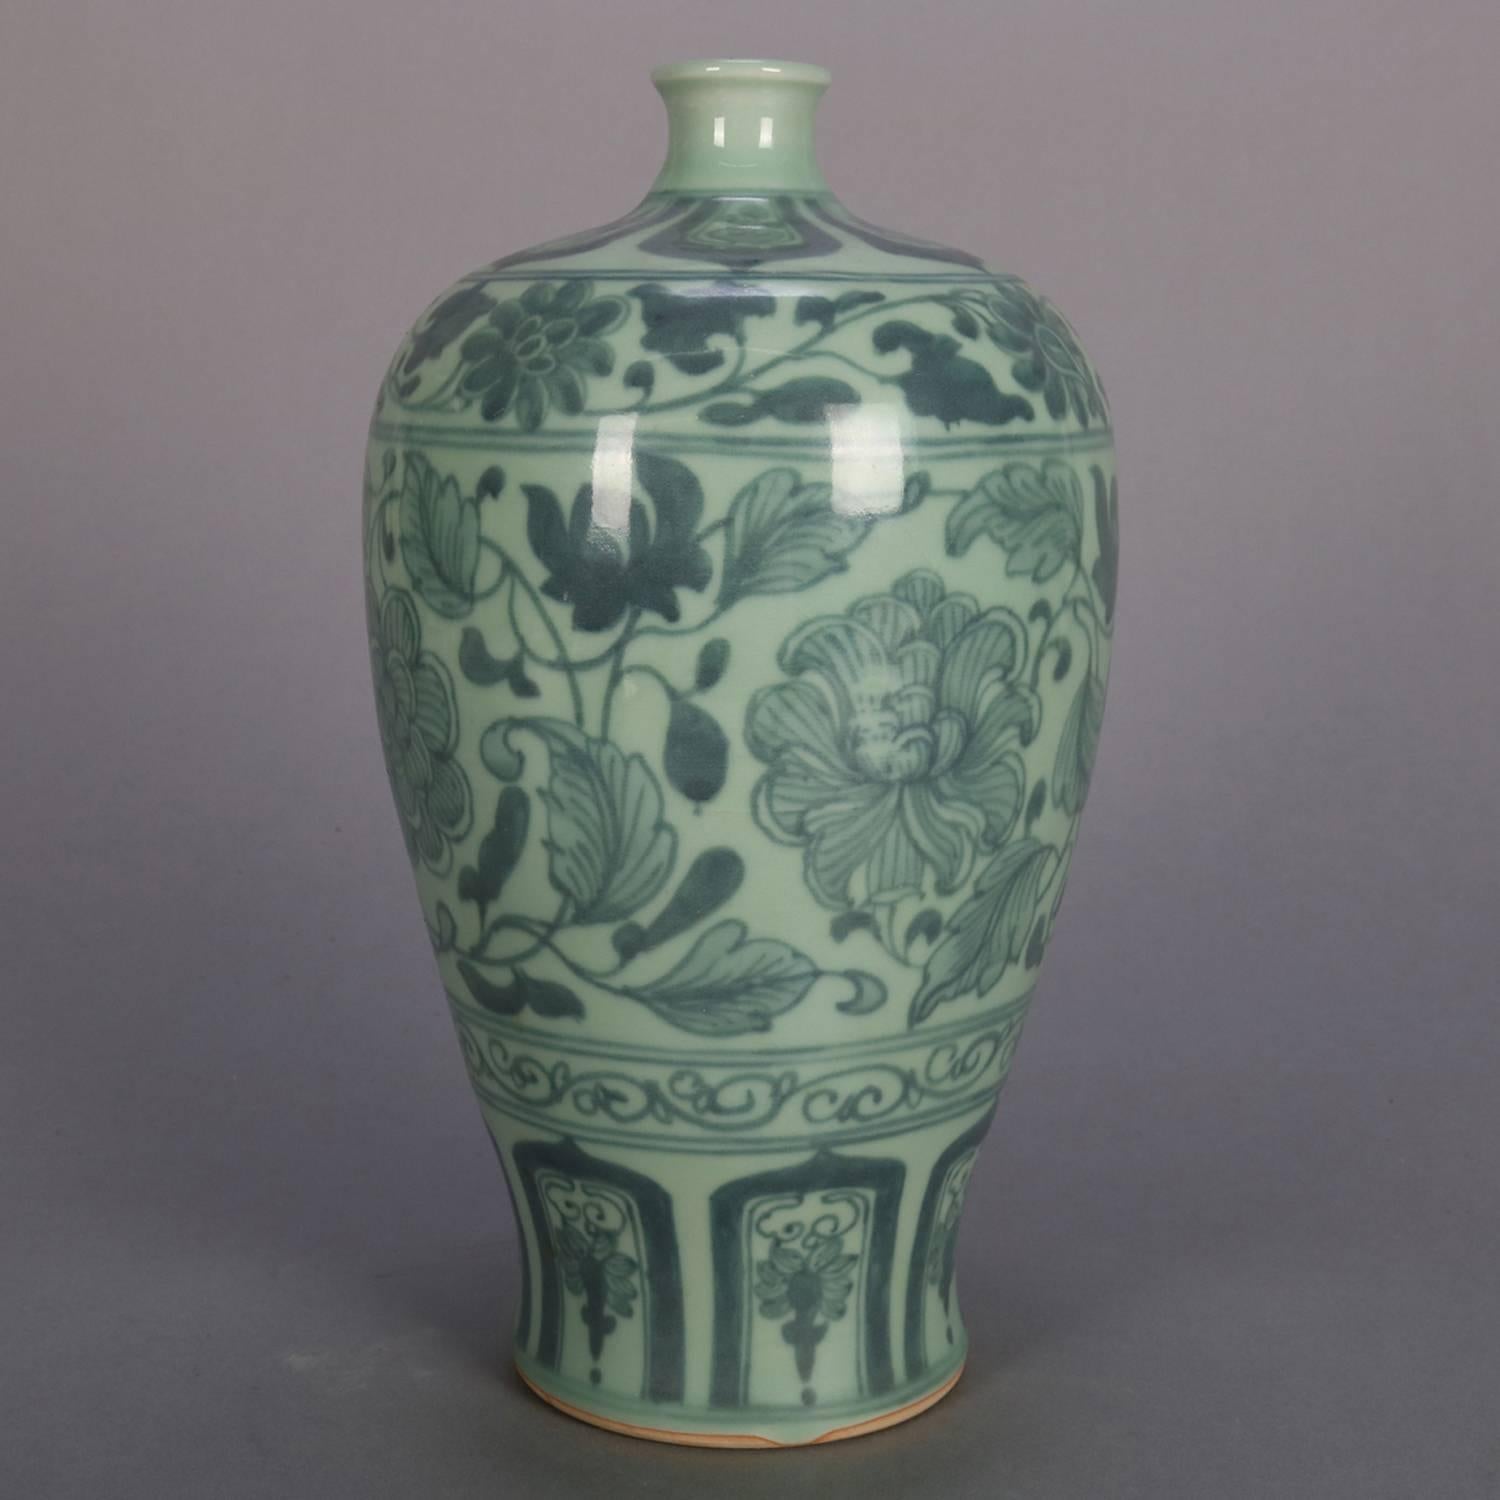 Chinese Celadon porcelain vase features allover floral and leaf decoration, 20th century

Measures: 11.5